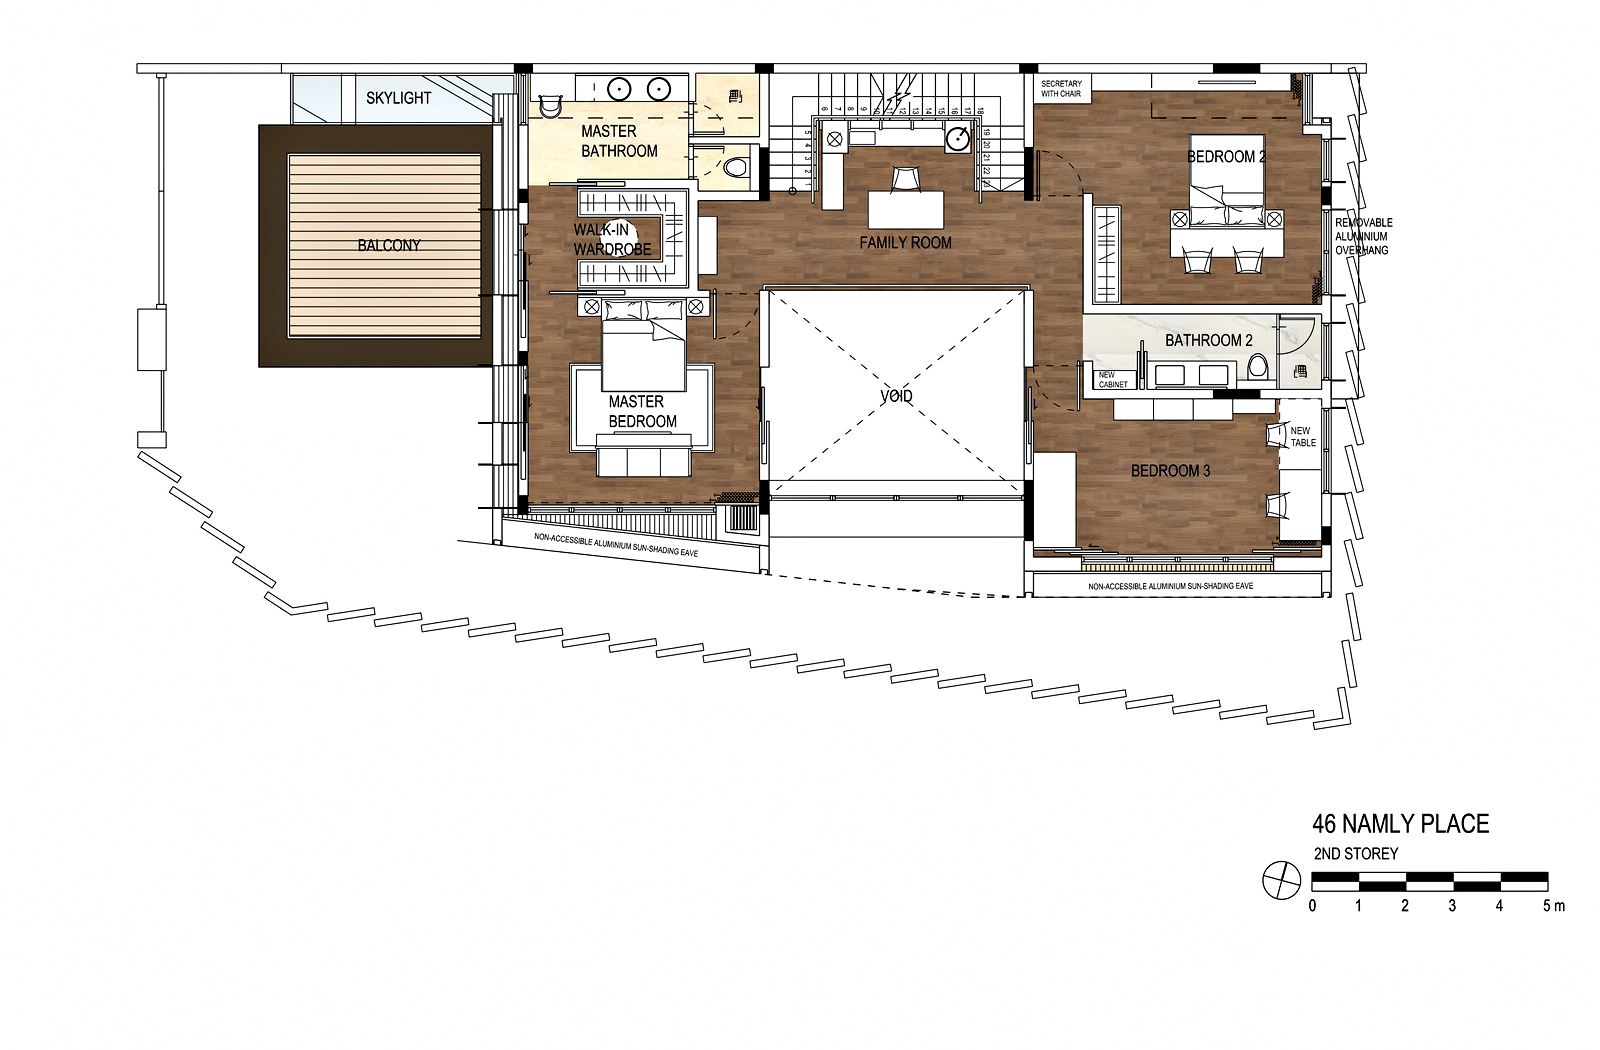 Second Floor Plan - The Loft House Luxury Residence - Namly Place, Singapore